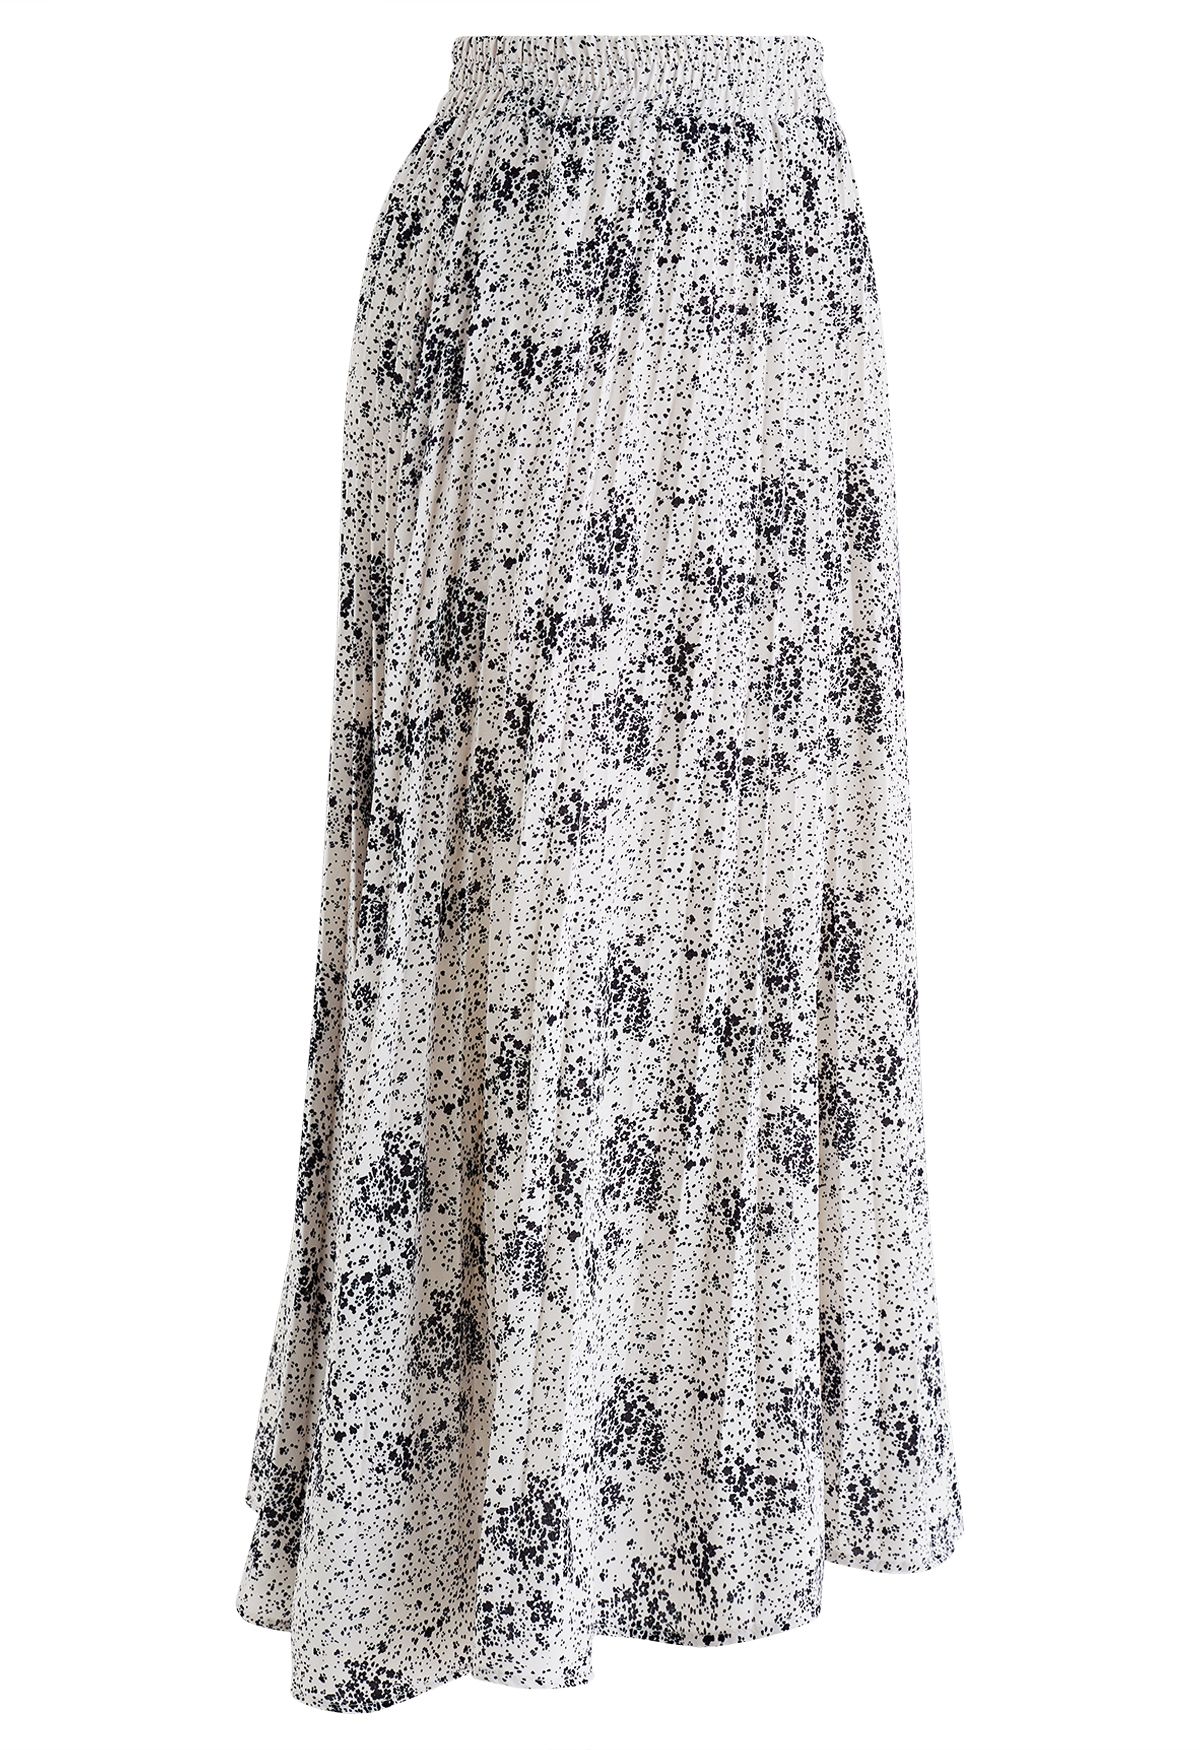 Floret and Spot Print Pleated Midi Skirt in Ivory